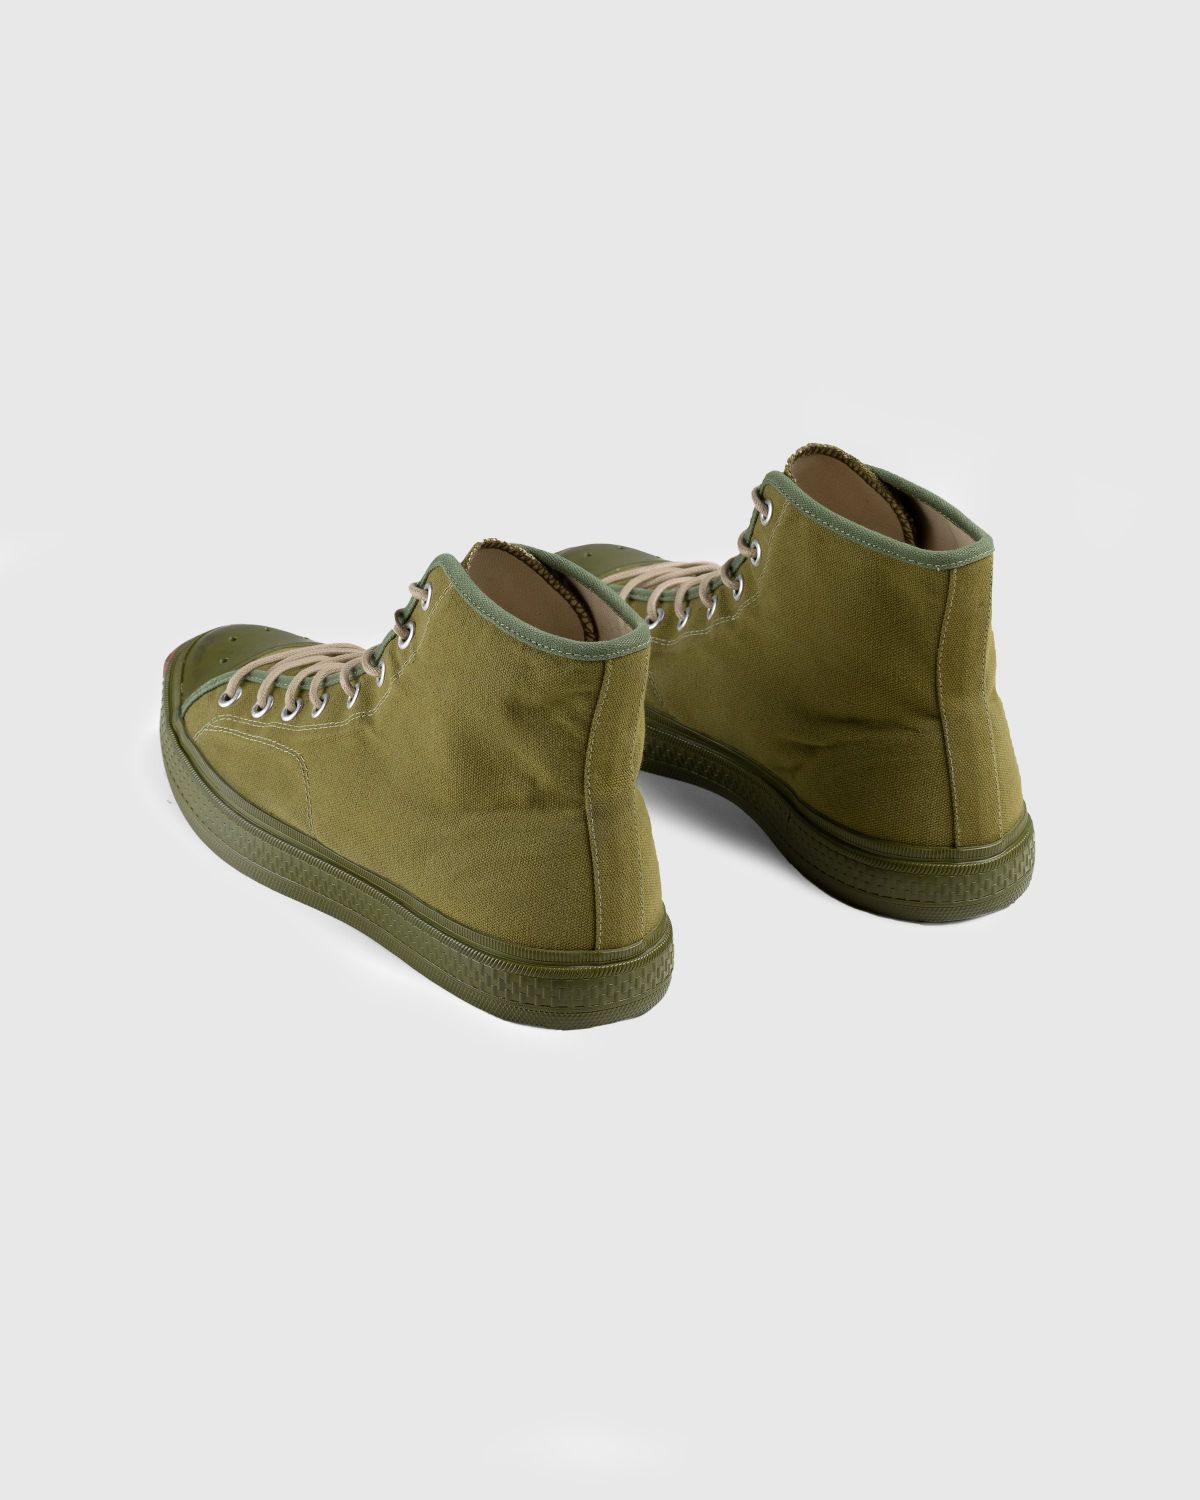 Acne Studios – Ballow High-Top Sneakers Olive Green - High Top Sneakers - Green - Image 4